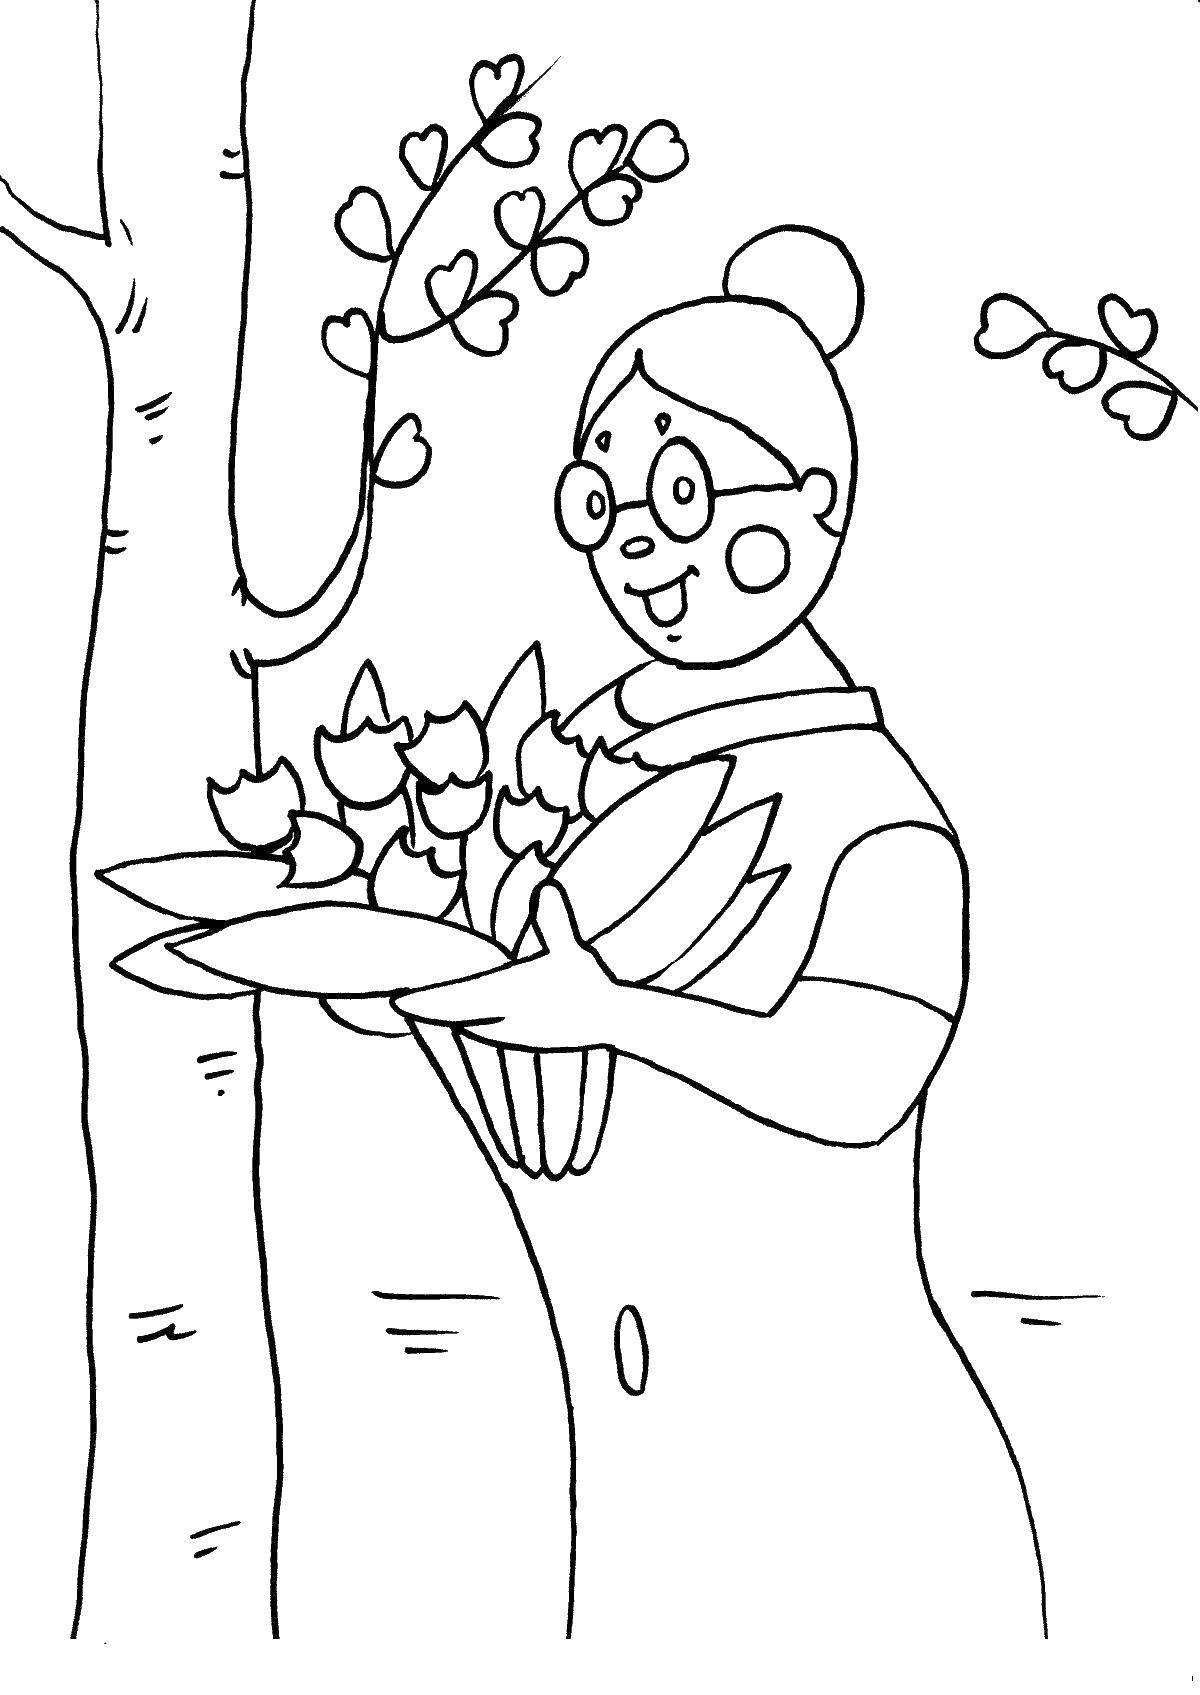 Coloring Flowers to the teacher. Category greeting cards. Tags:  the flowers, the teacher.